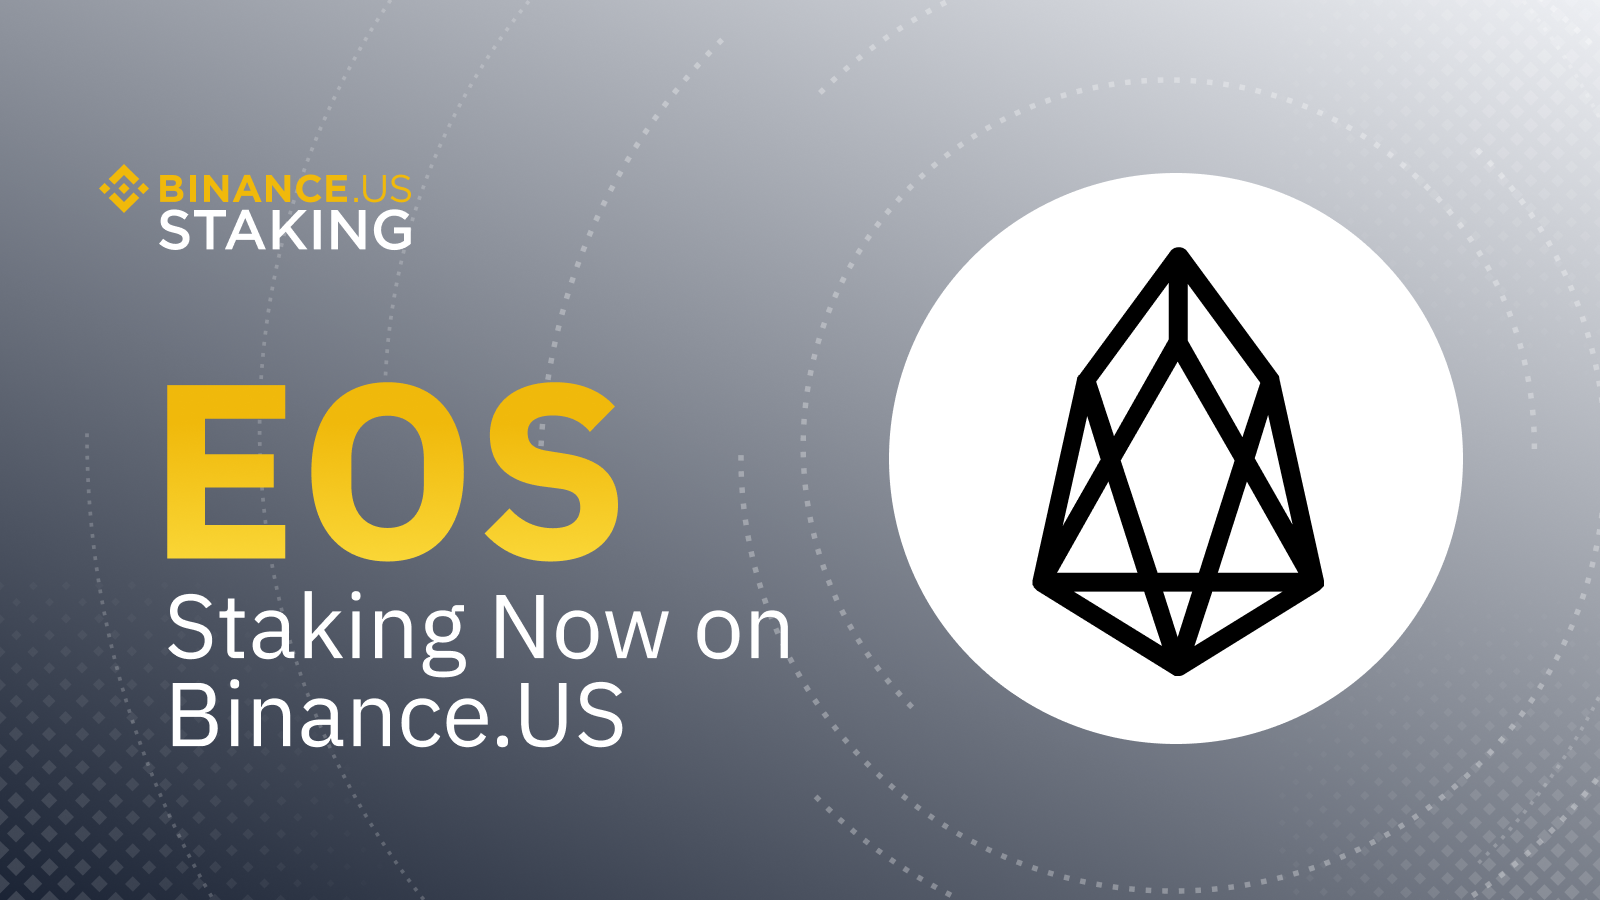 Beginner's guide to EOS: How to start earning rewards - EOS - cryptolog.fun Forums